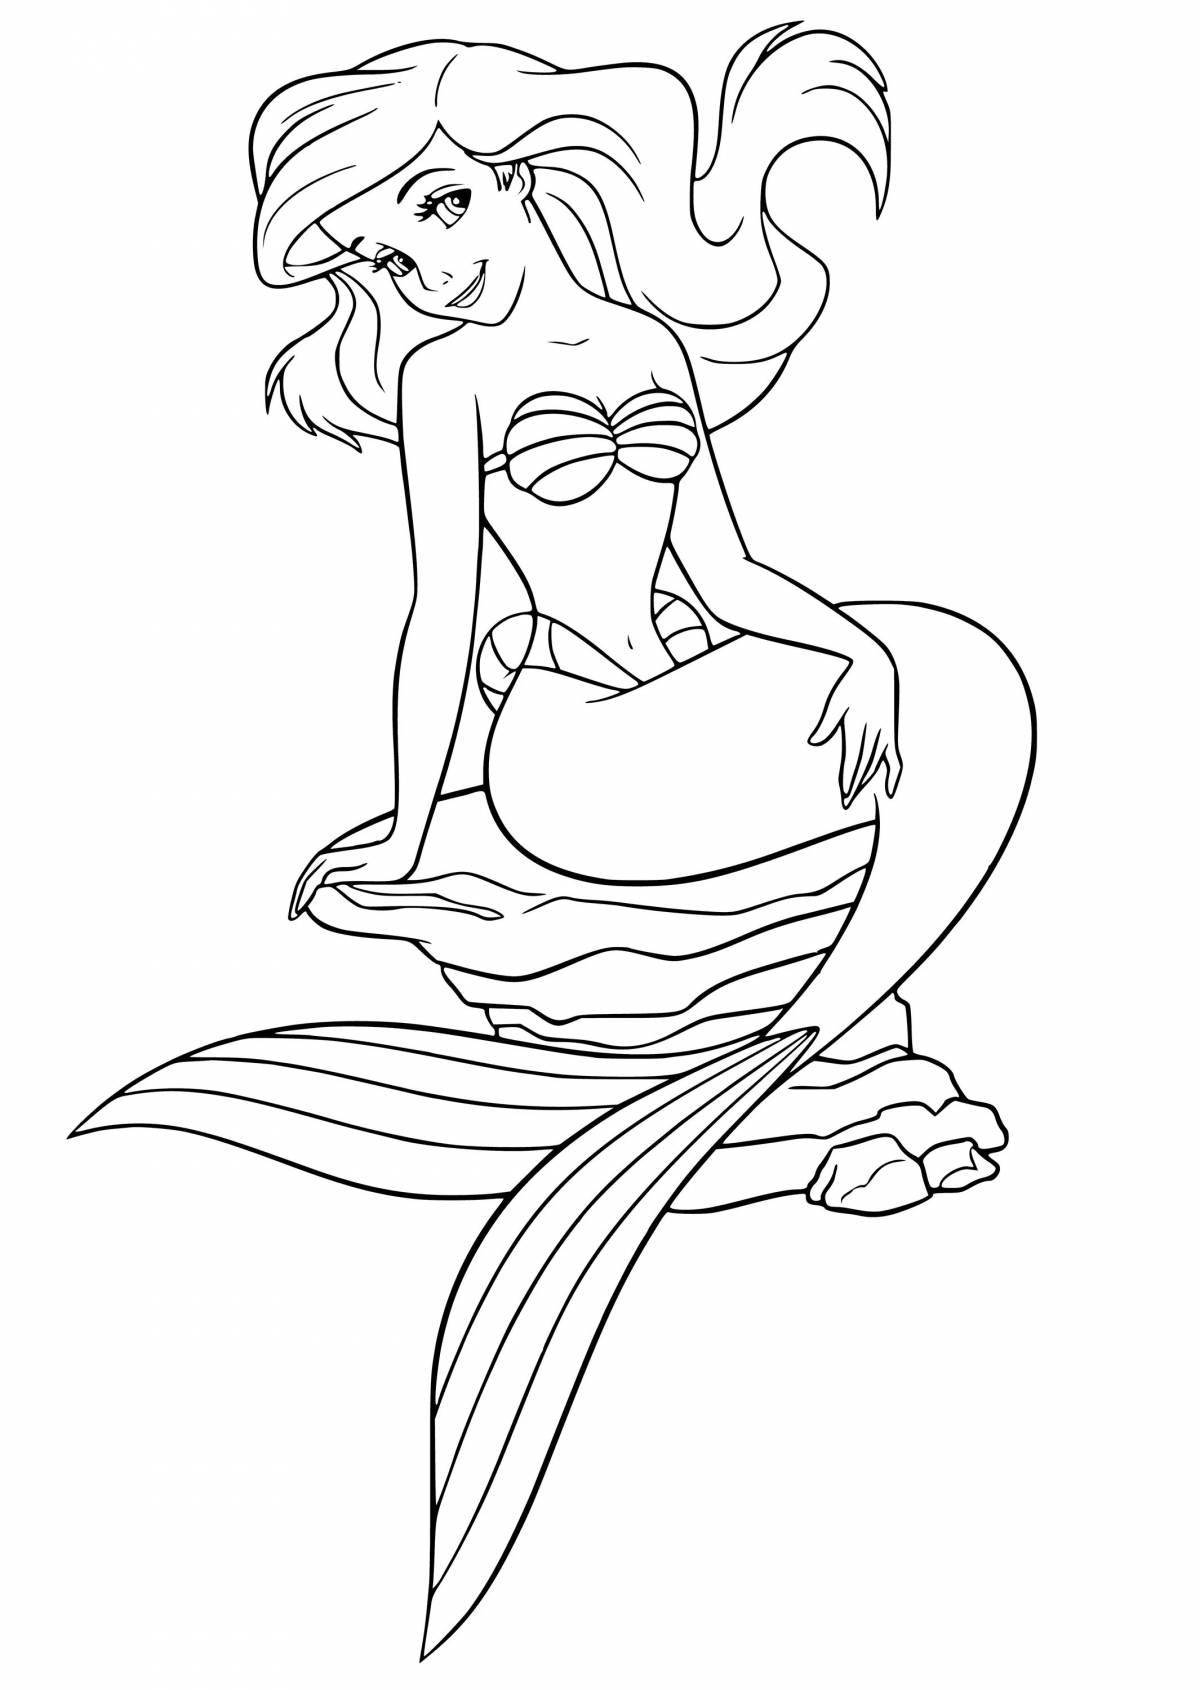 Radiant coloring page princess ariel the little mermaid